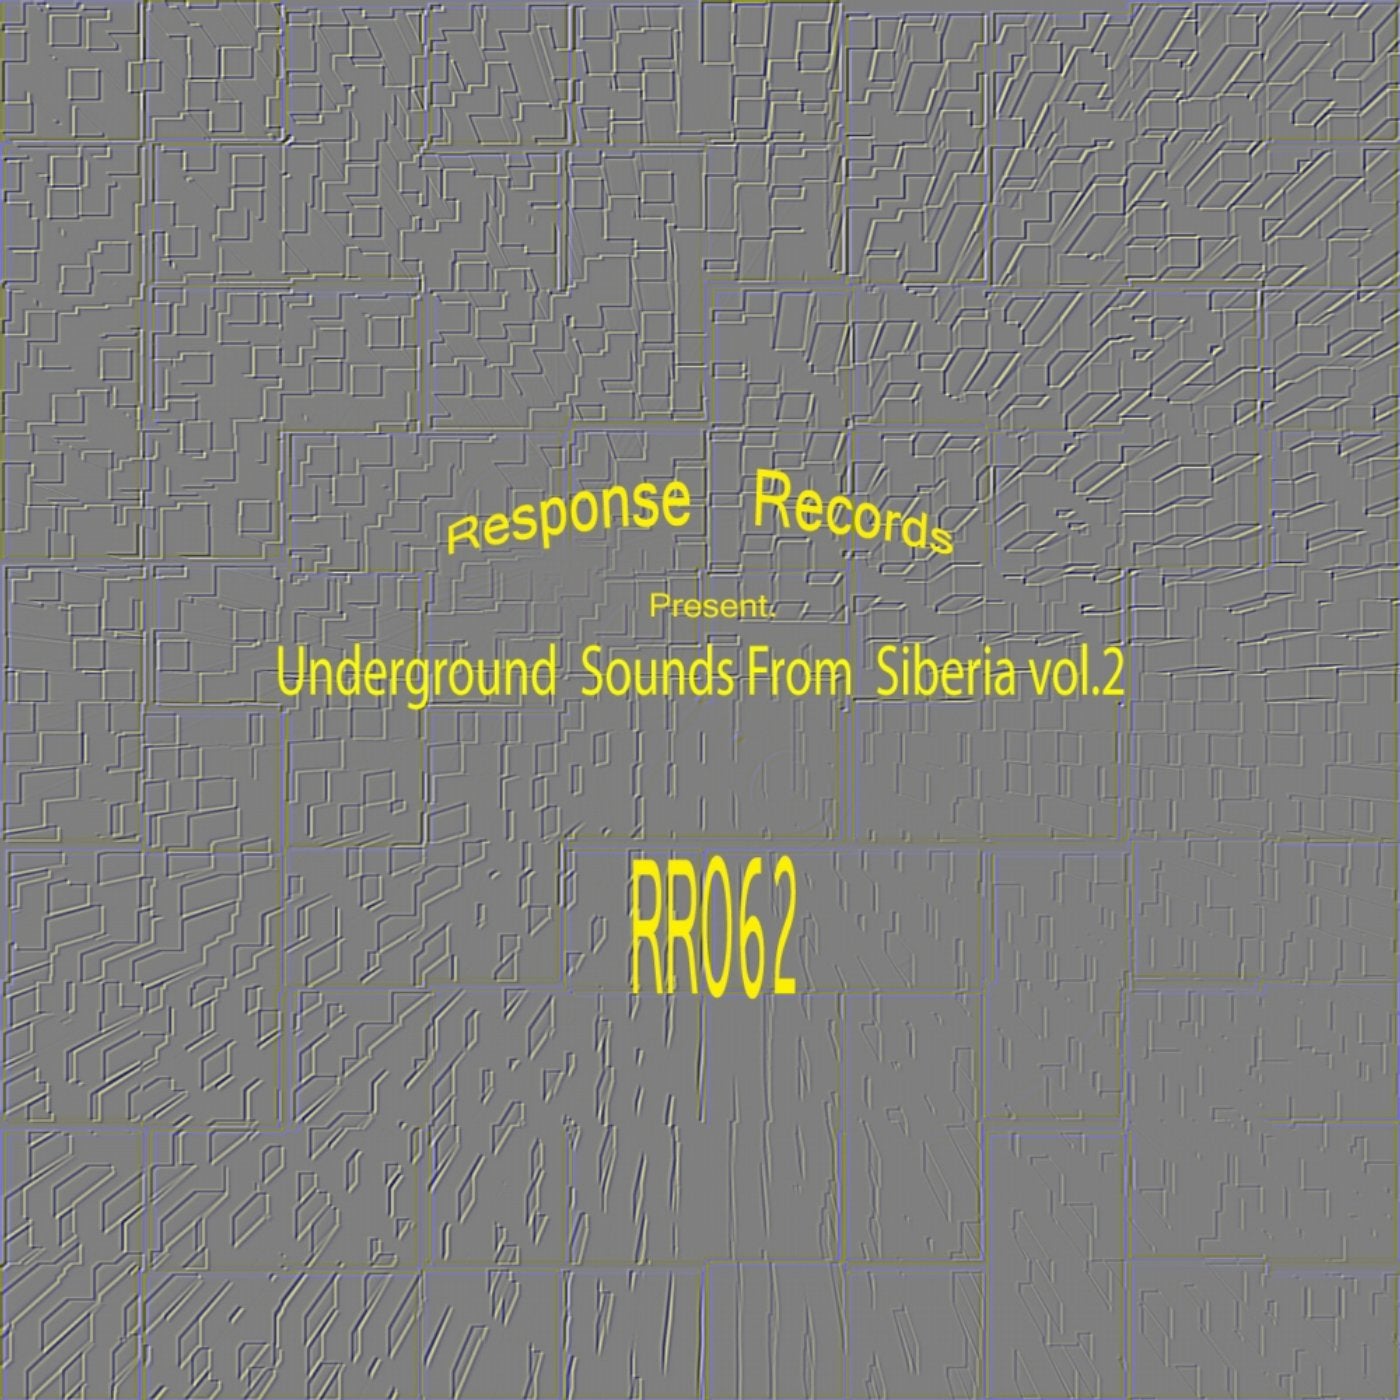 Underground Sounds From Siberia, Vol. 2